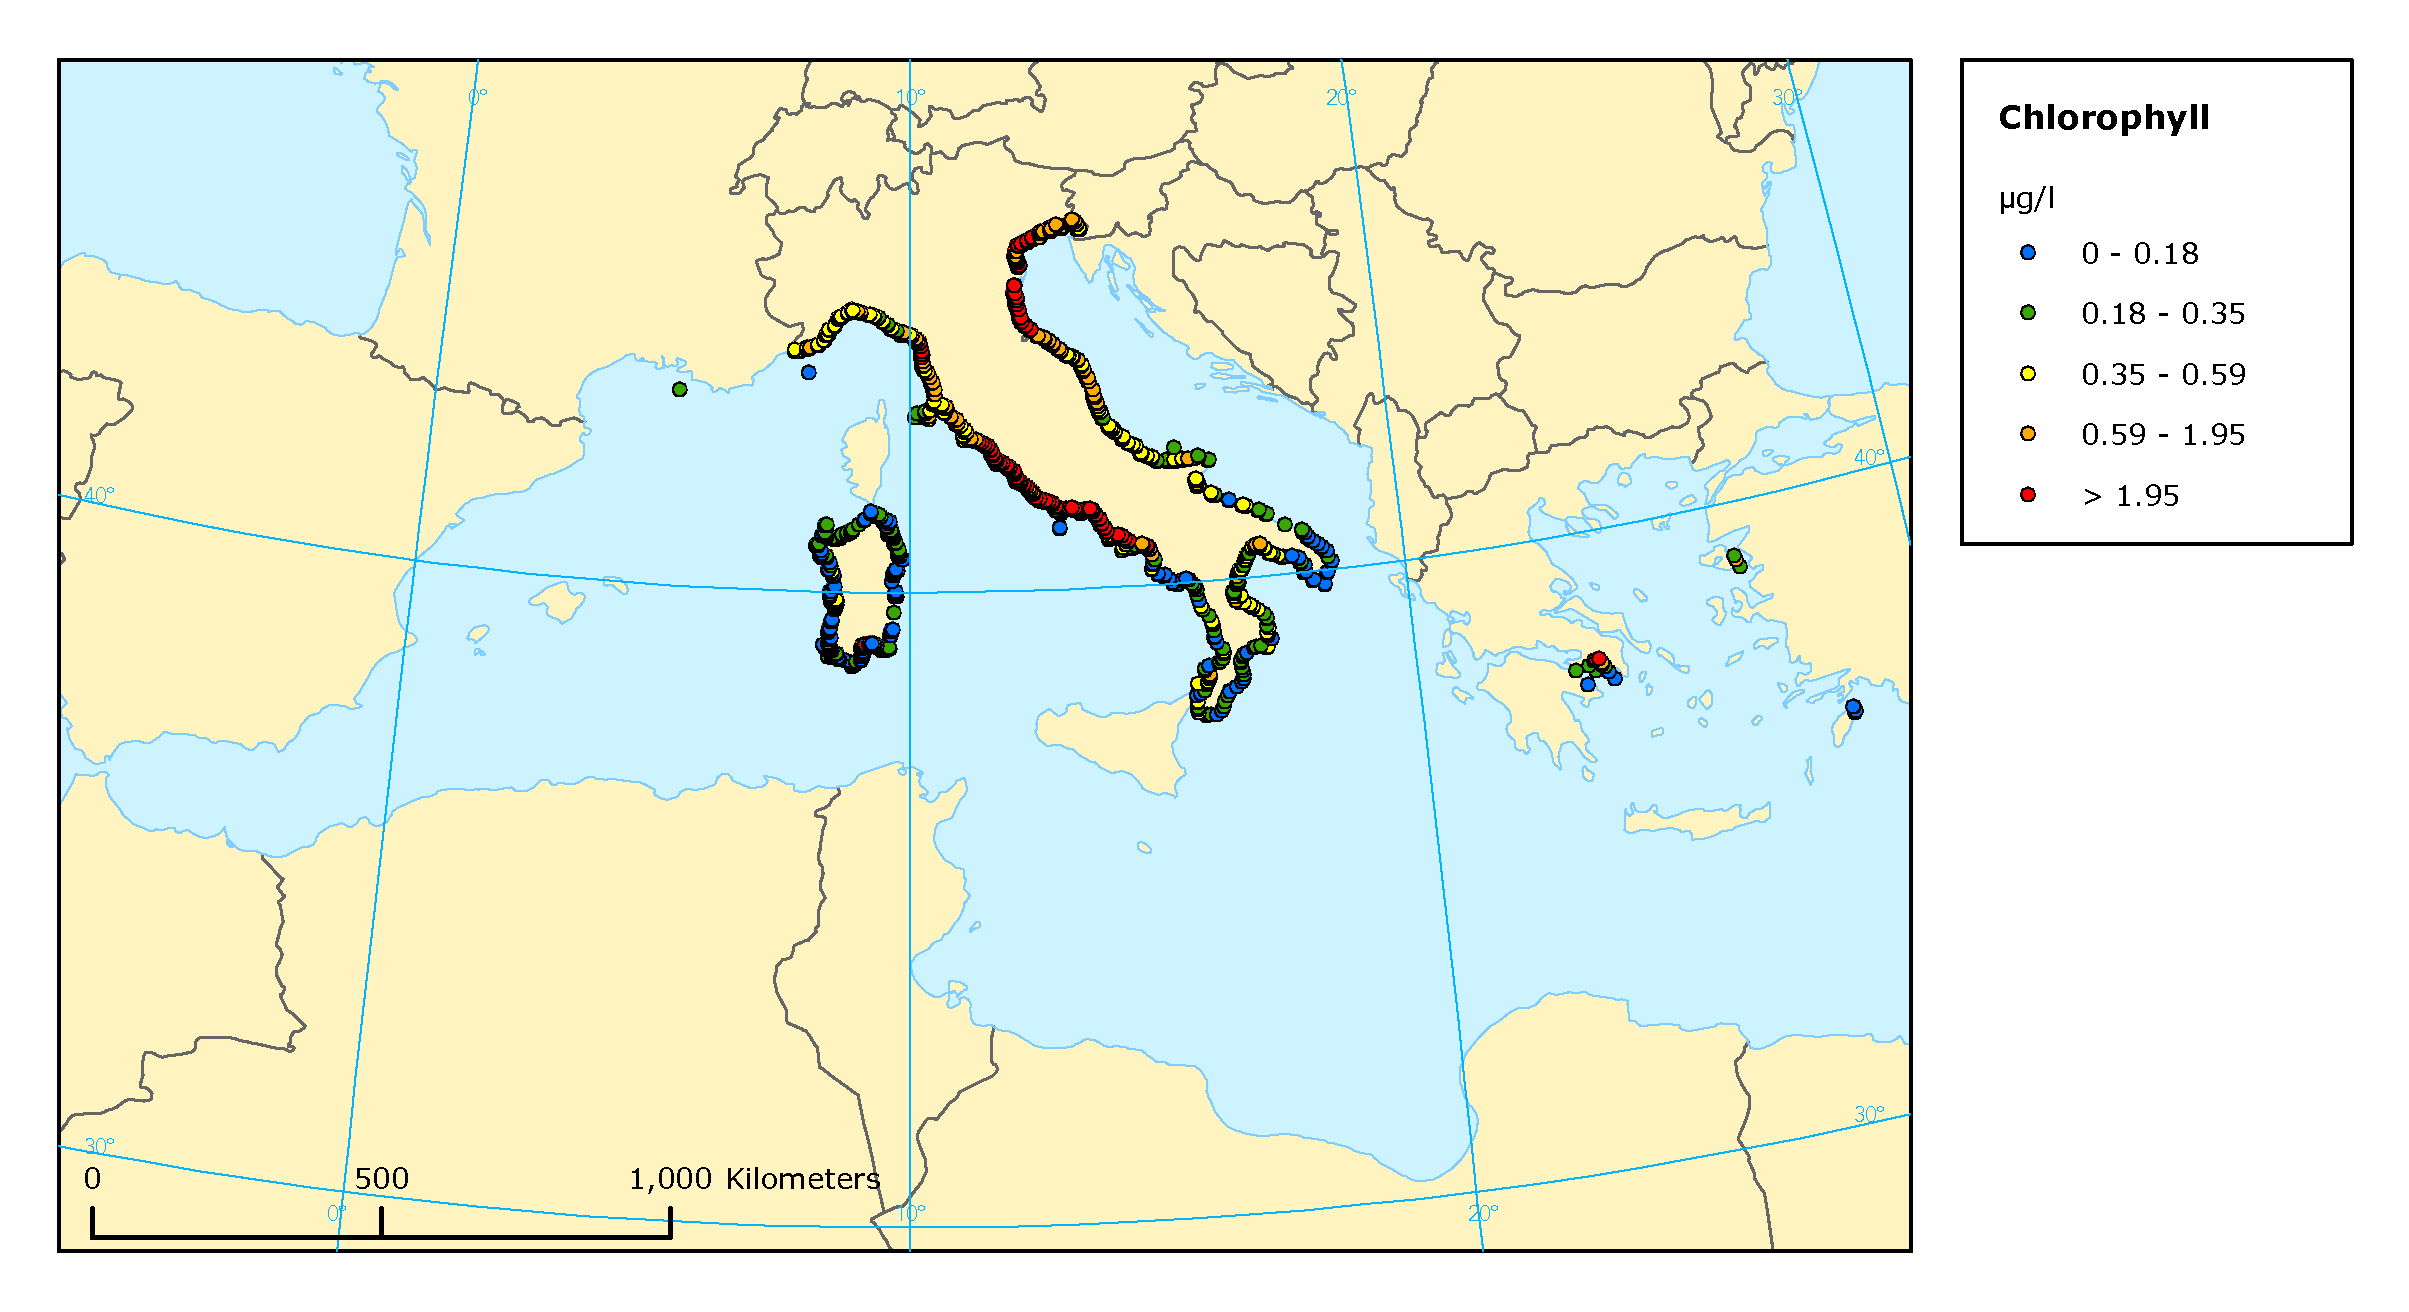 Mean summer surface concentrations of chlorophyll a in the Mediterranean Sea, 2003